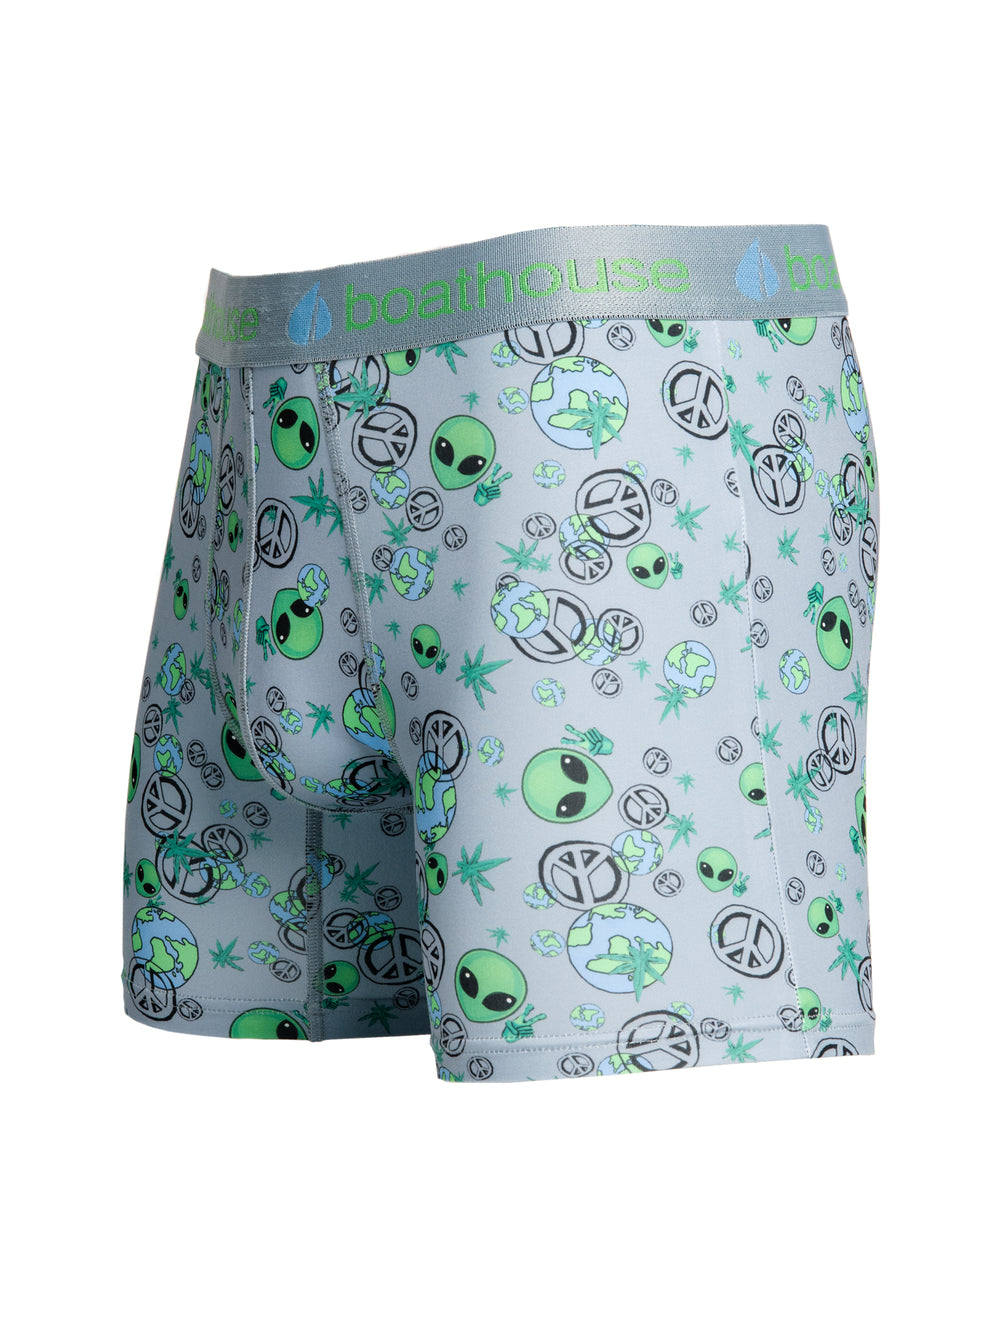 NOVELTY BOXER BRIEF - ALIEN HIPPY - CLEARANCE